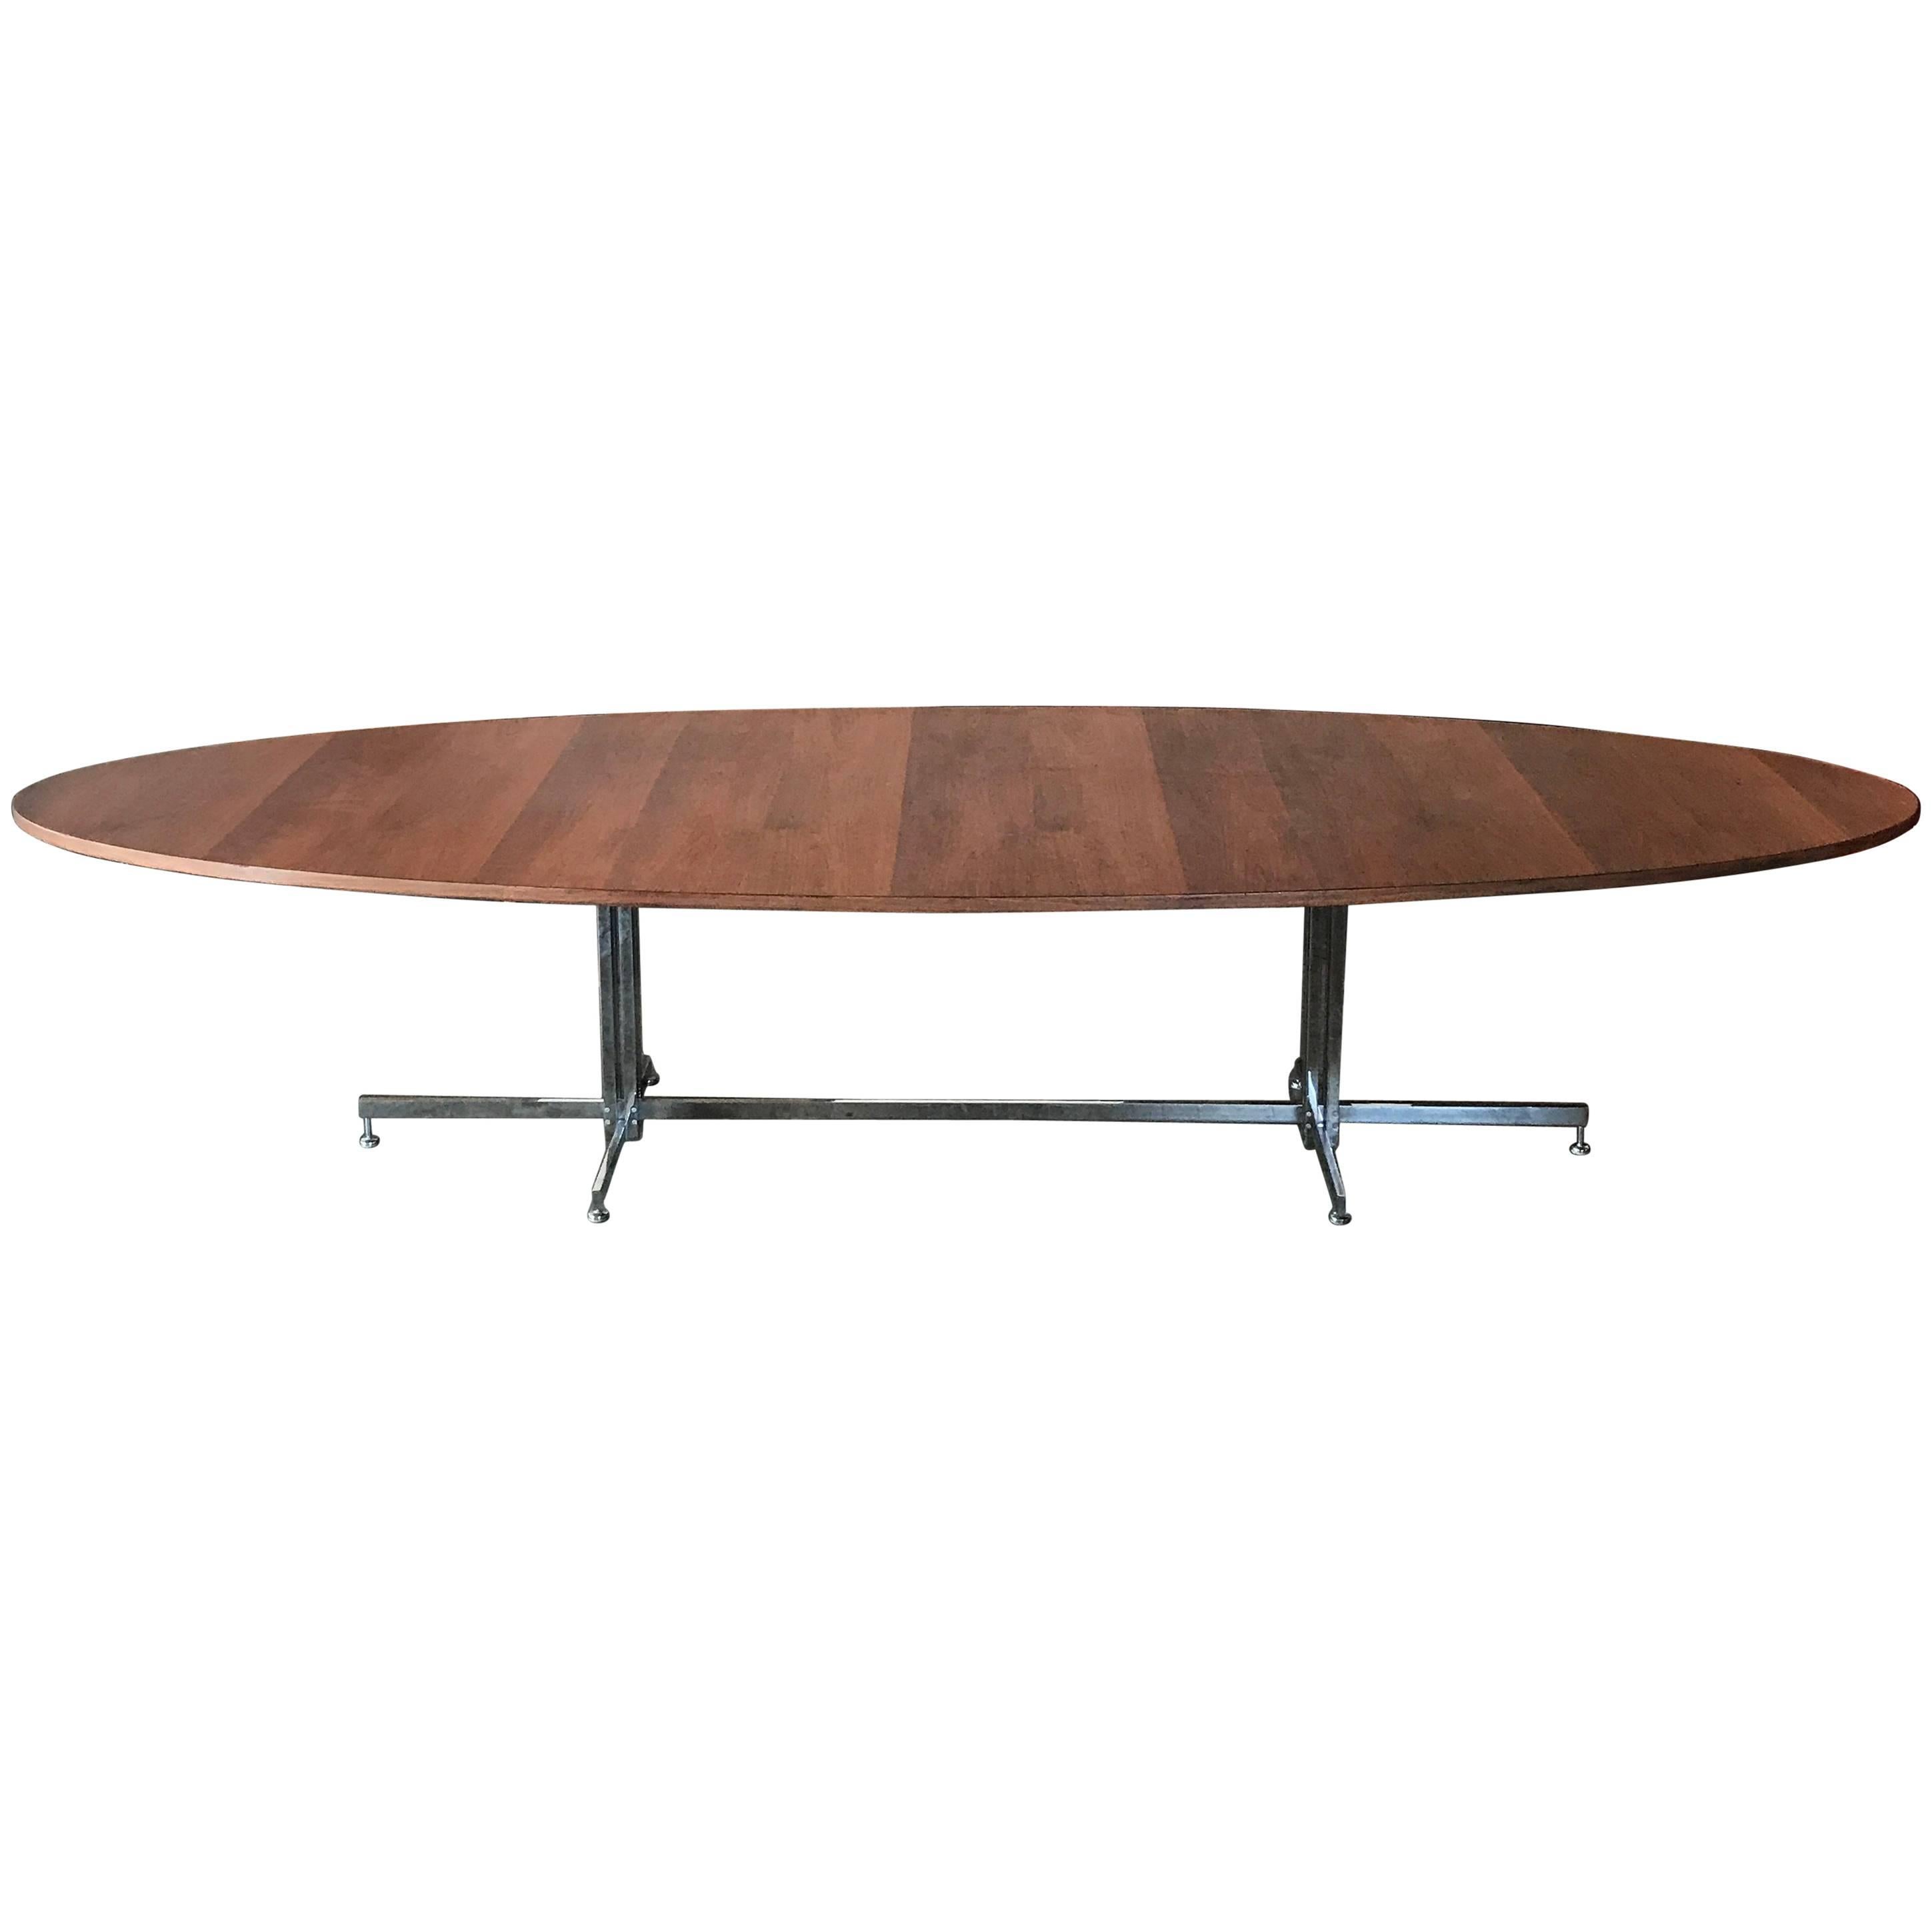 Hugh Acton Walnut Chrome Conference Dining Table